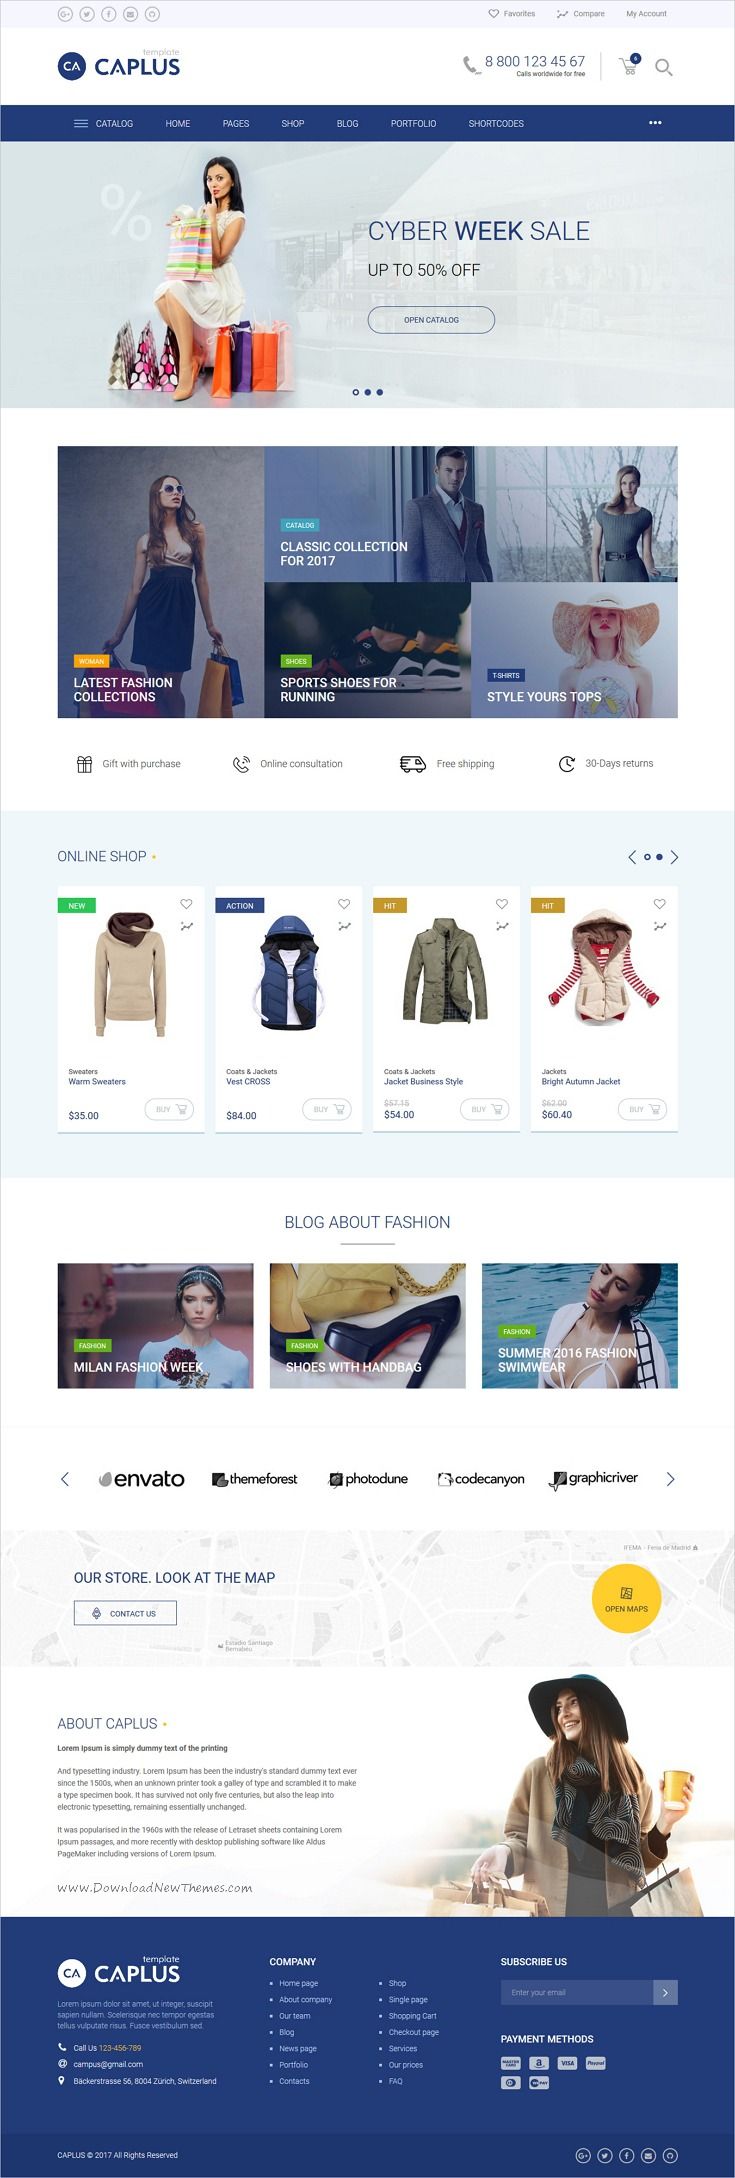 Caplus is clean and modern design 5in1 responsive #HTML5 template for multipurpo...